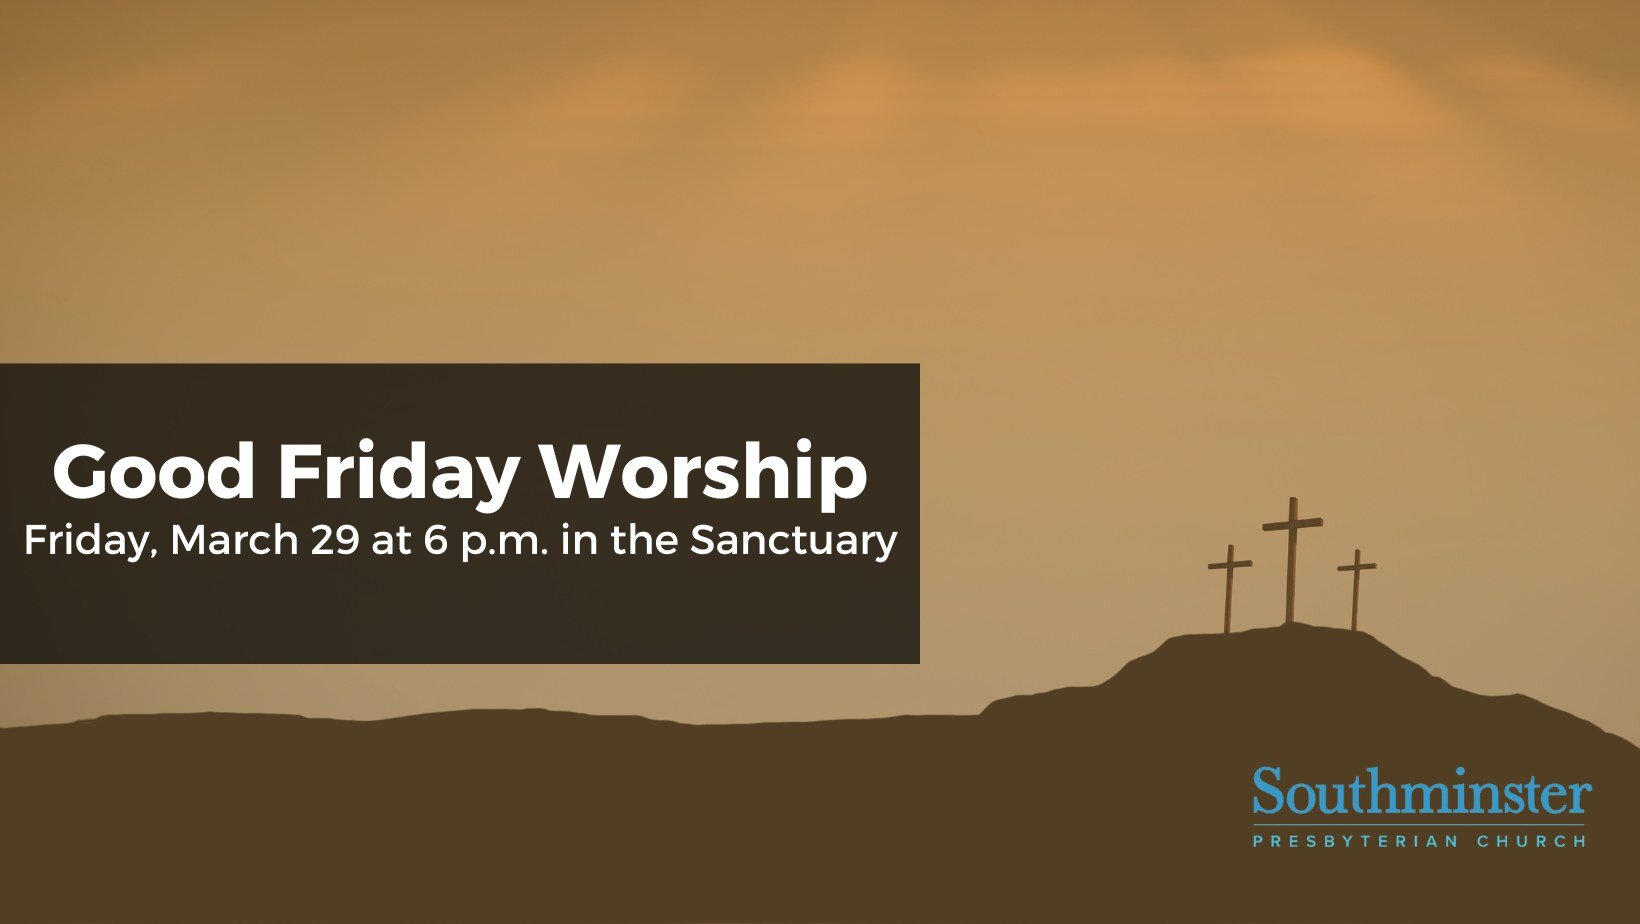 Join us tomorrow, March 29 at 6 p.m. for a moving Good Friday service in the Sanctuary.